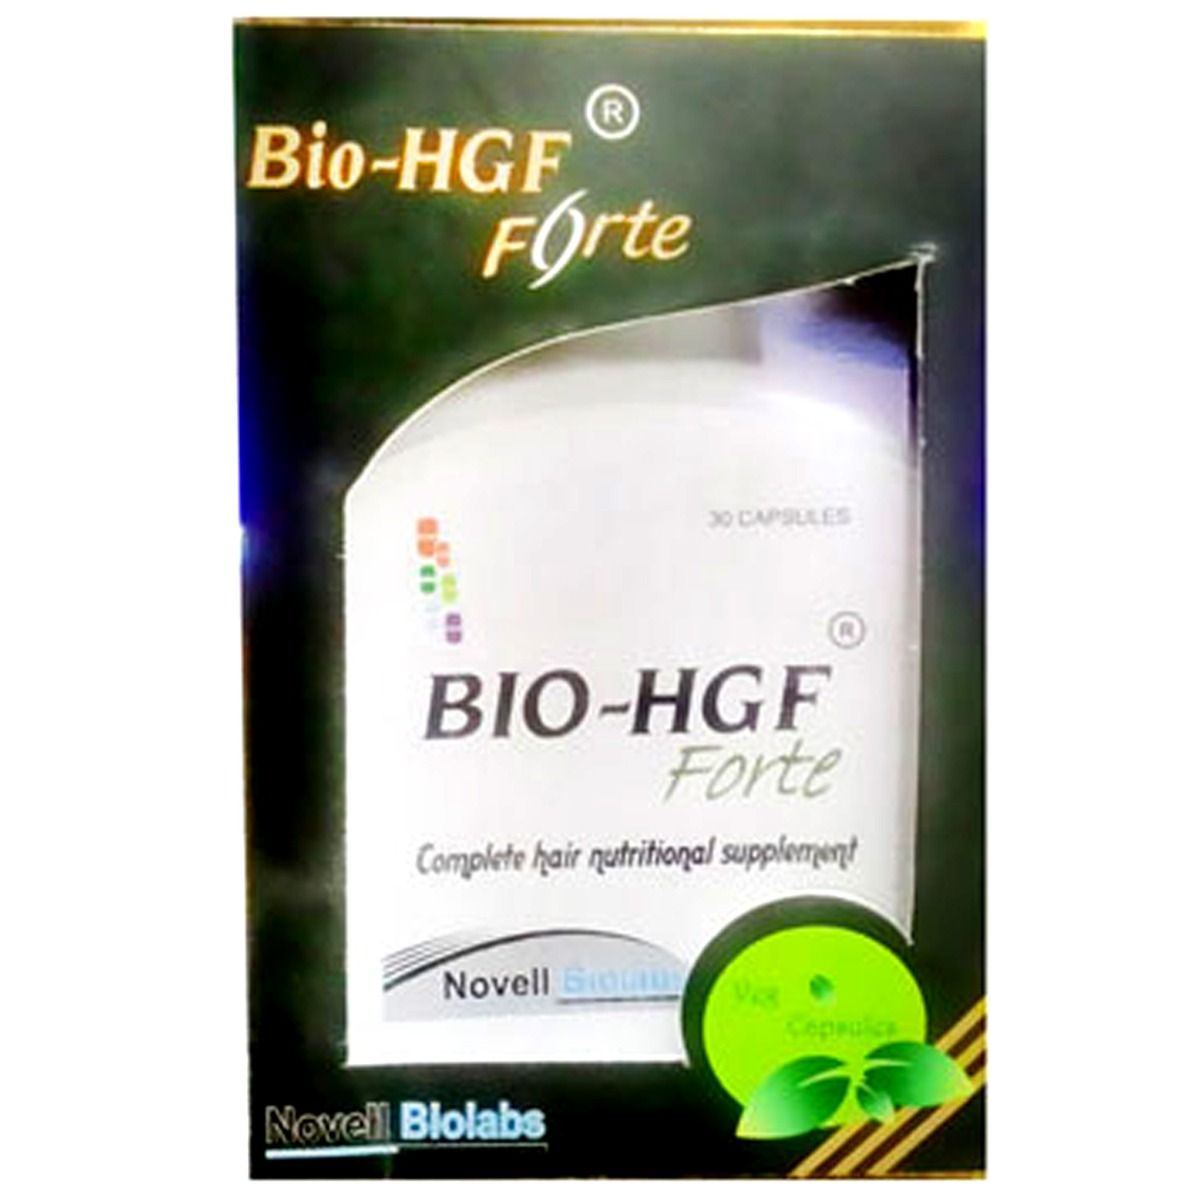 Bio Hgf Forte Tablet 10's Price, Uses, Side Effects, Composition - Apollo  Pharmacy